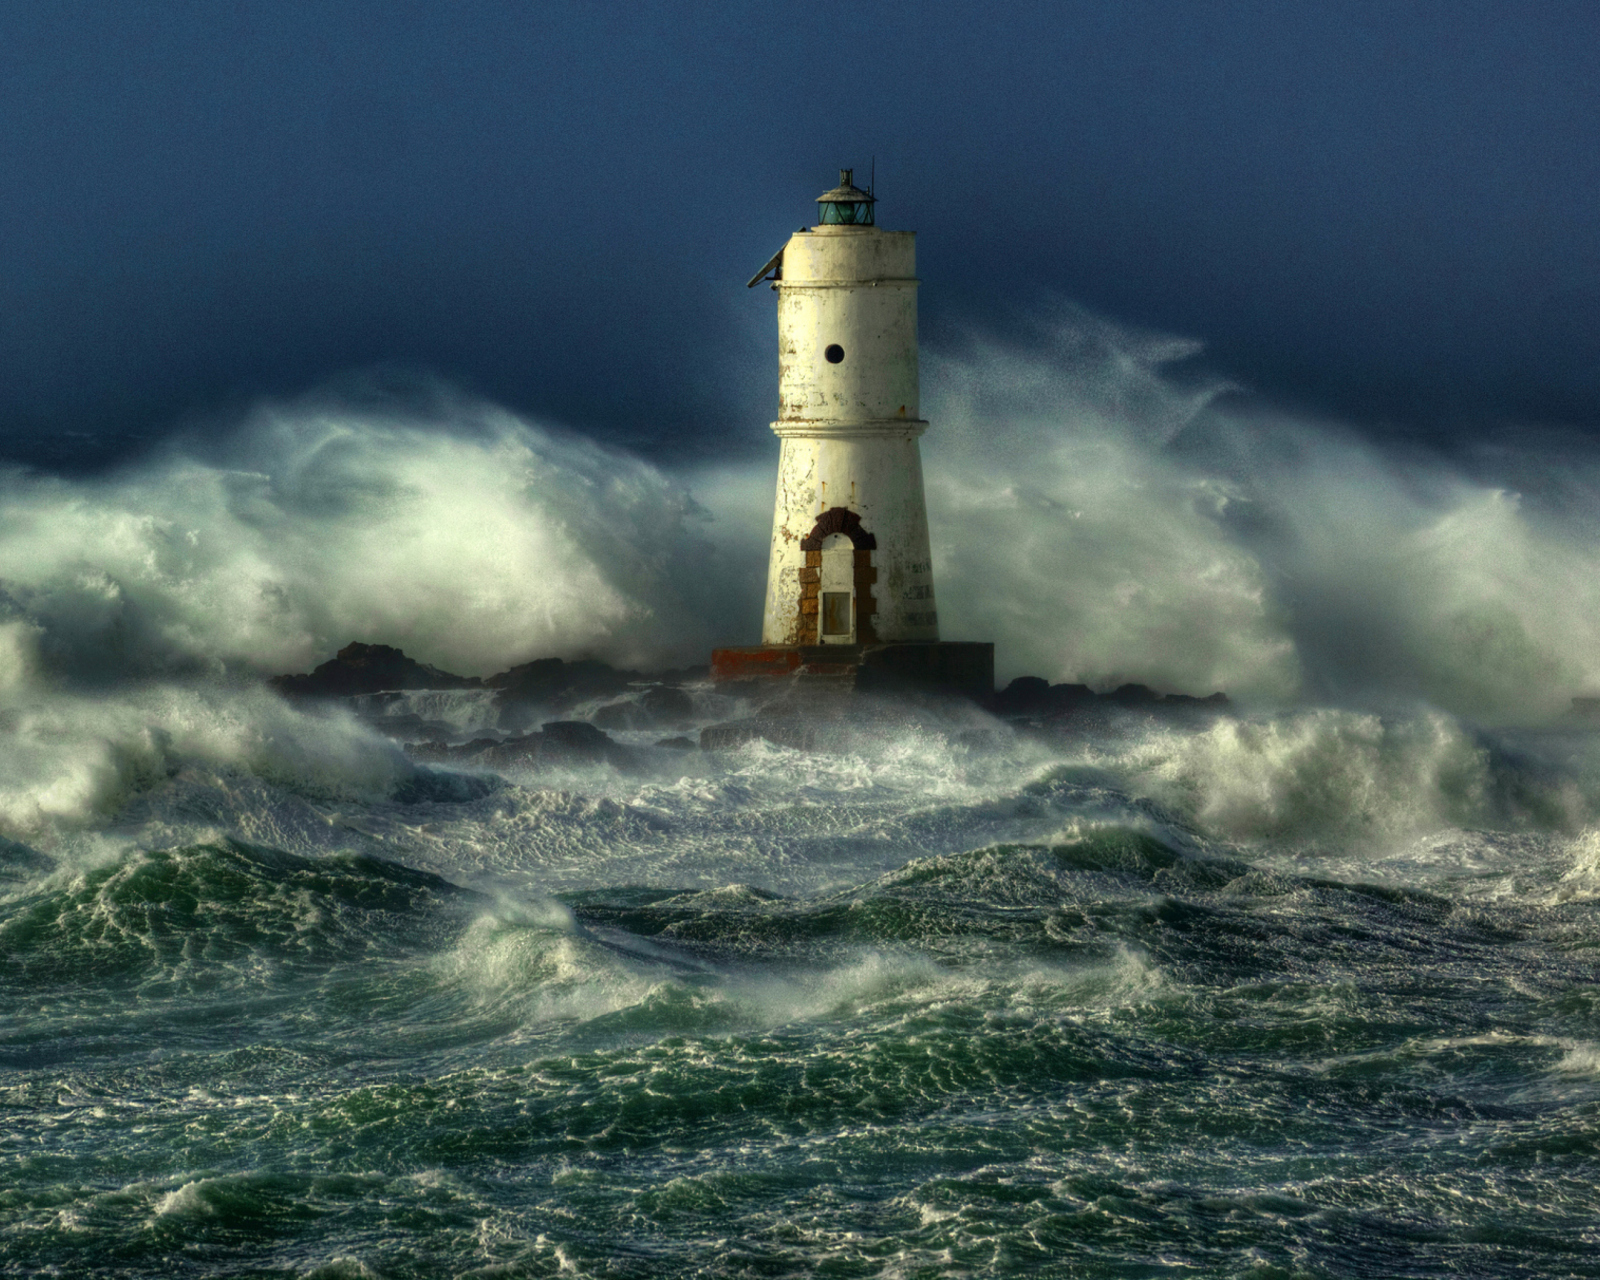 Ocean Storm And Lonely Lighthouse wallpaper 1600x1280